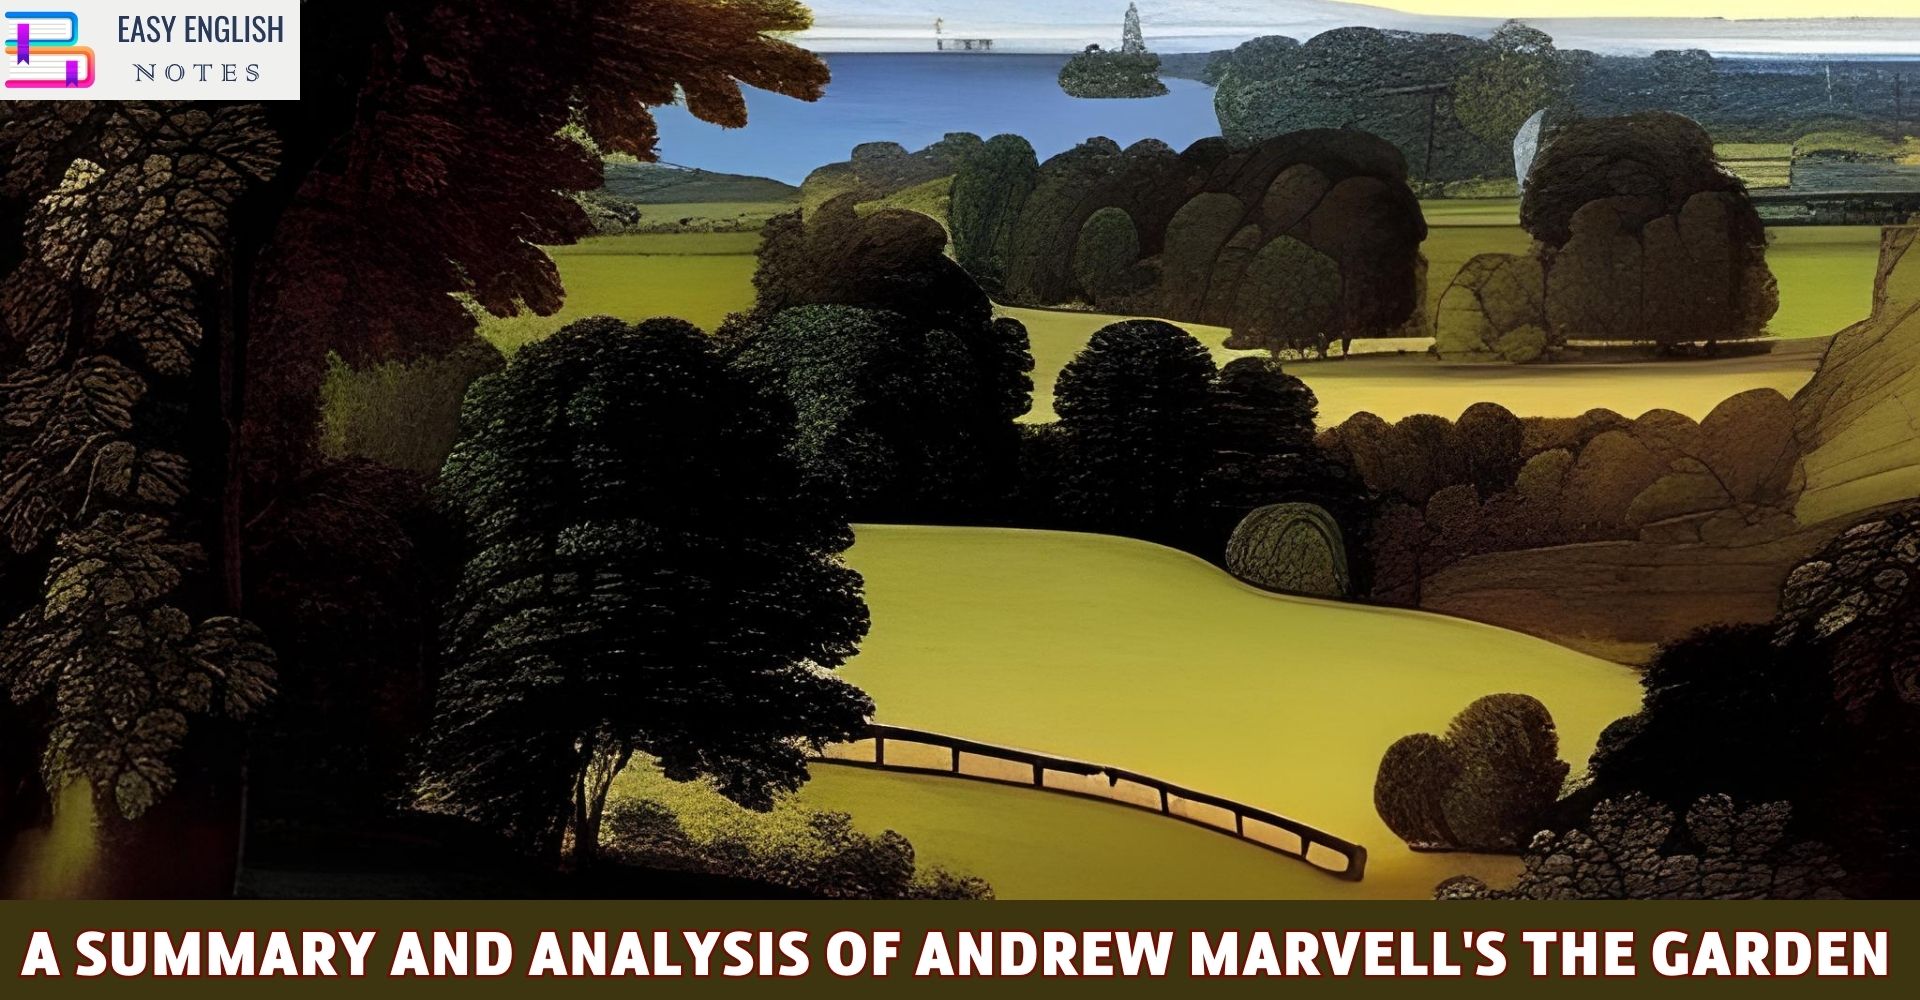 A Summary and Analysis of Andrew Marvell's The Garden